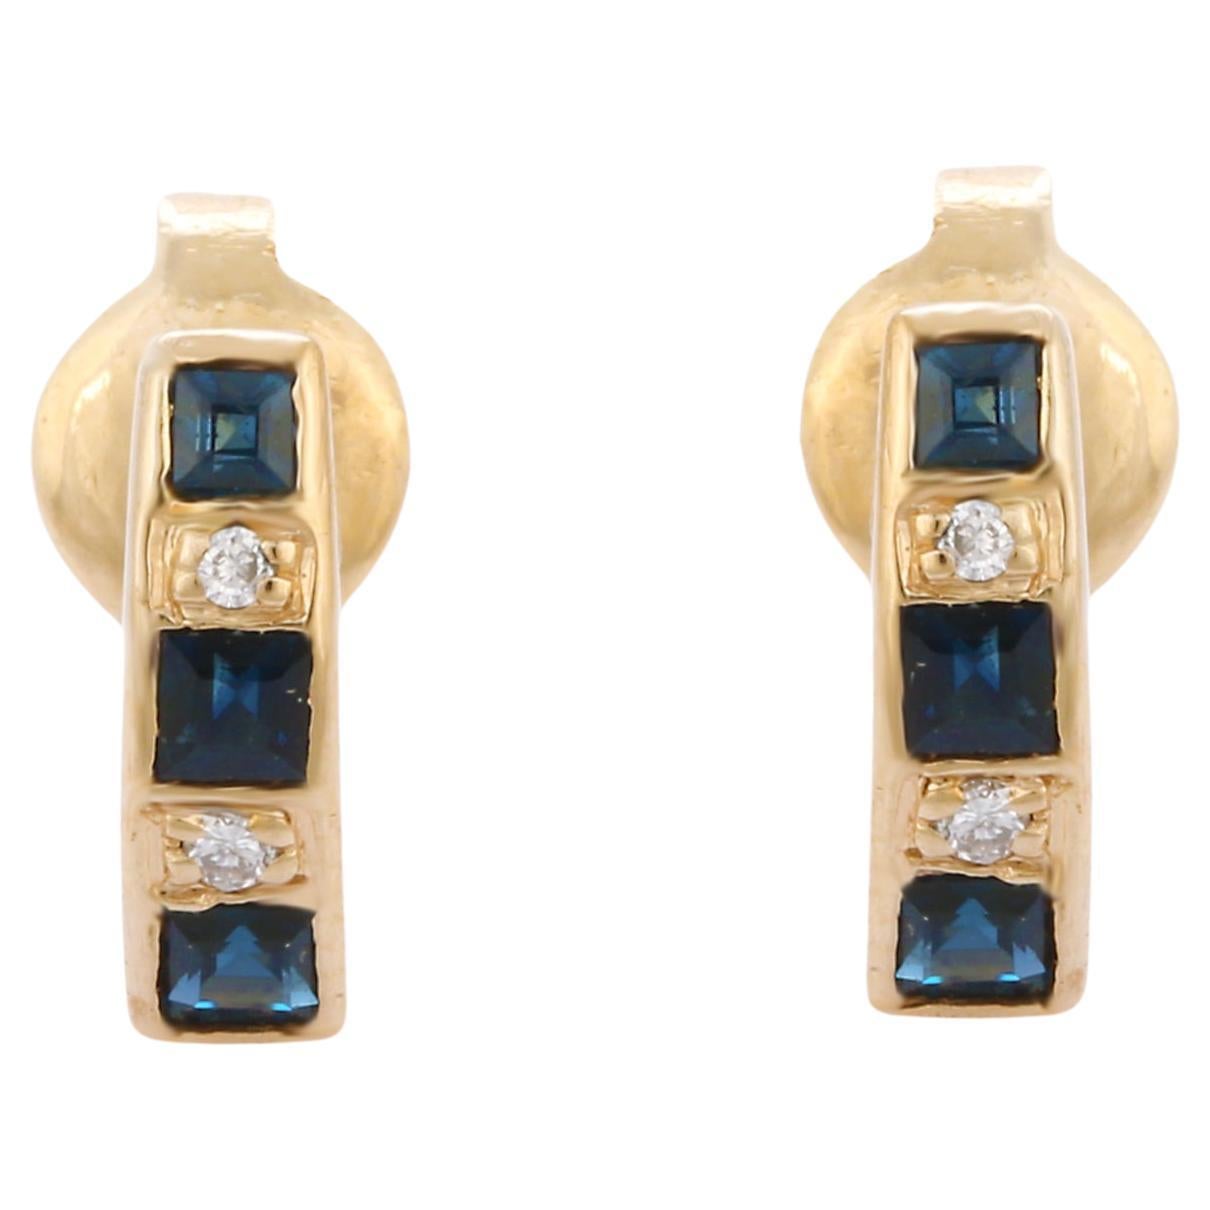 Square Cut Blue Sapphire Long Bar Stud Earrings in 14K Yellow Gold with Diamonds